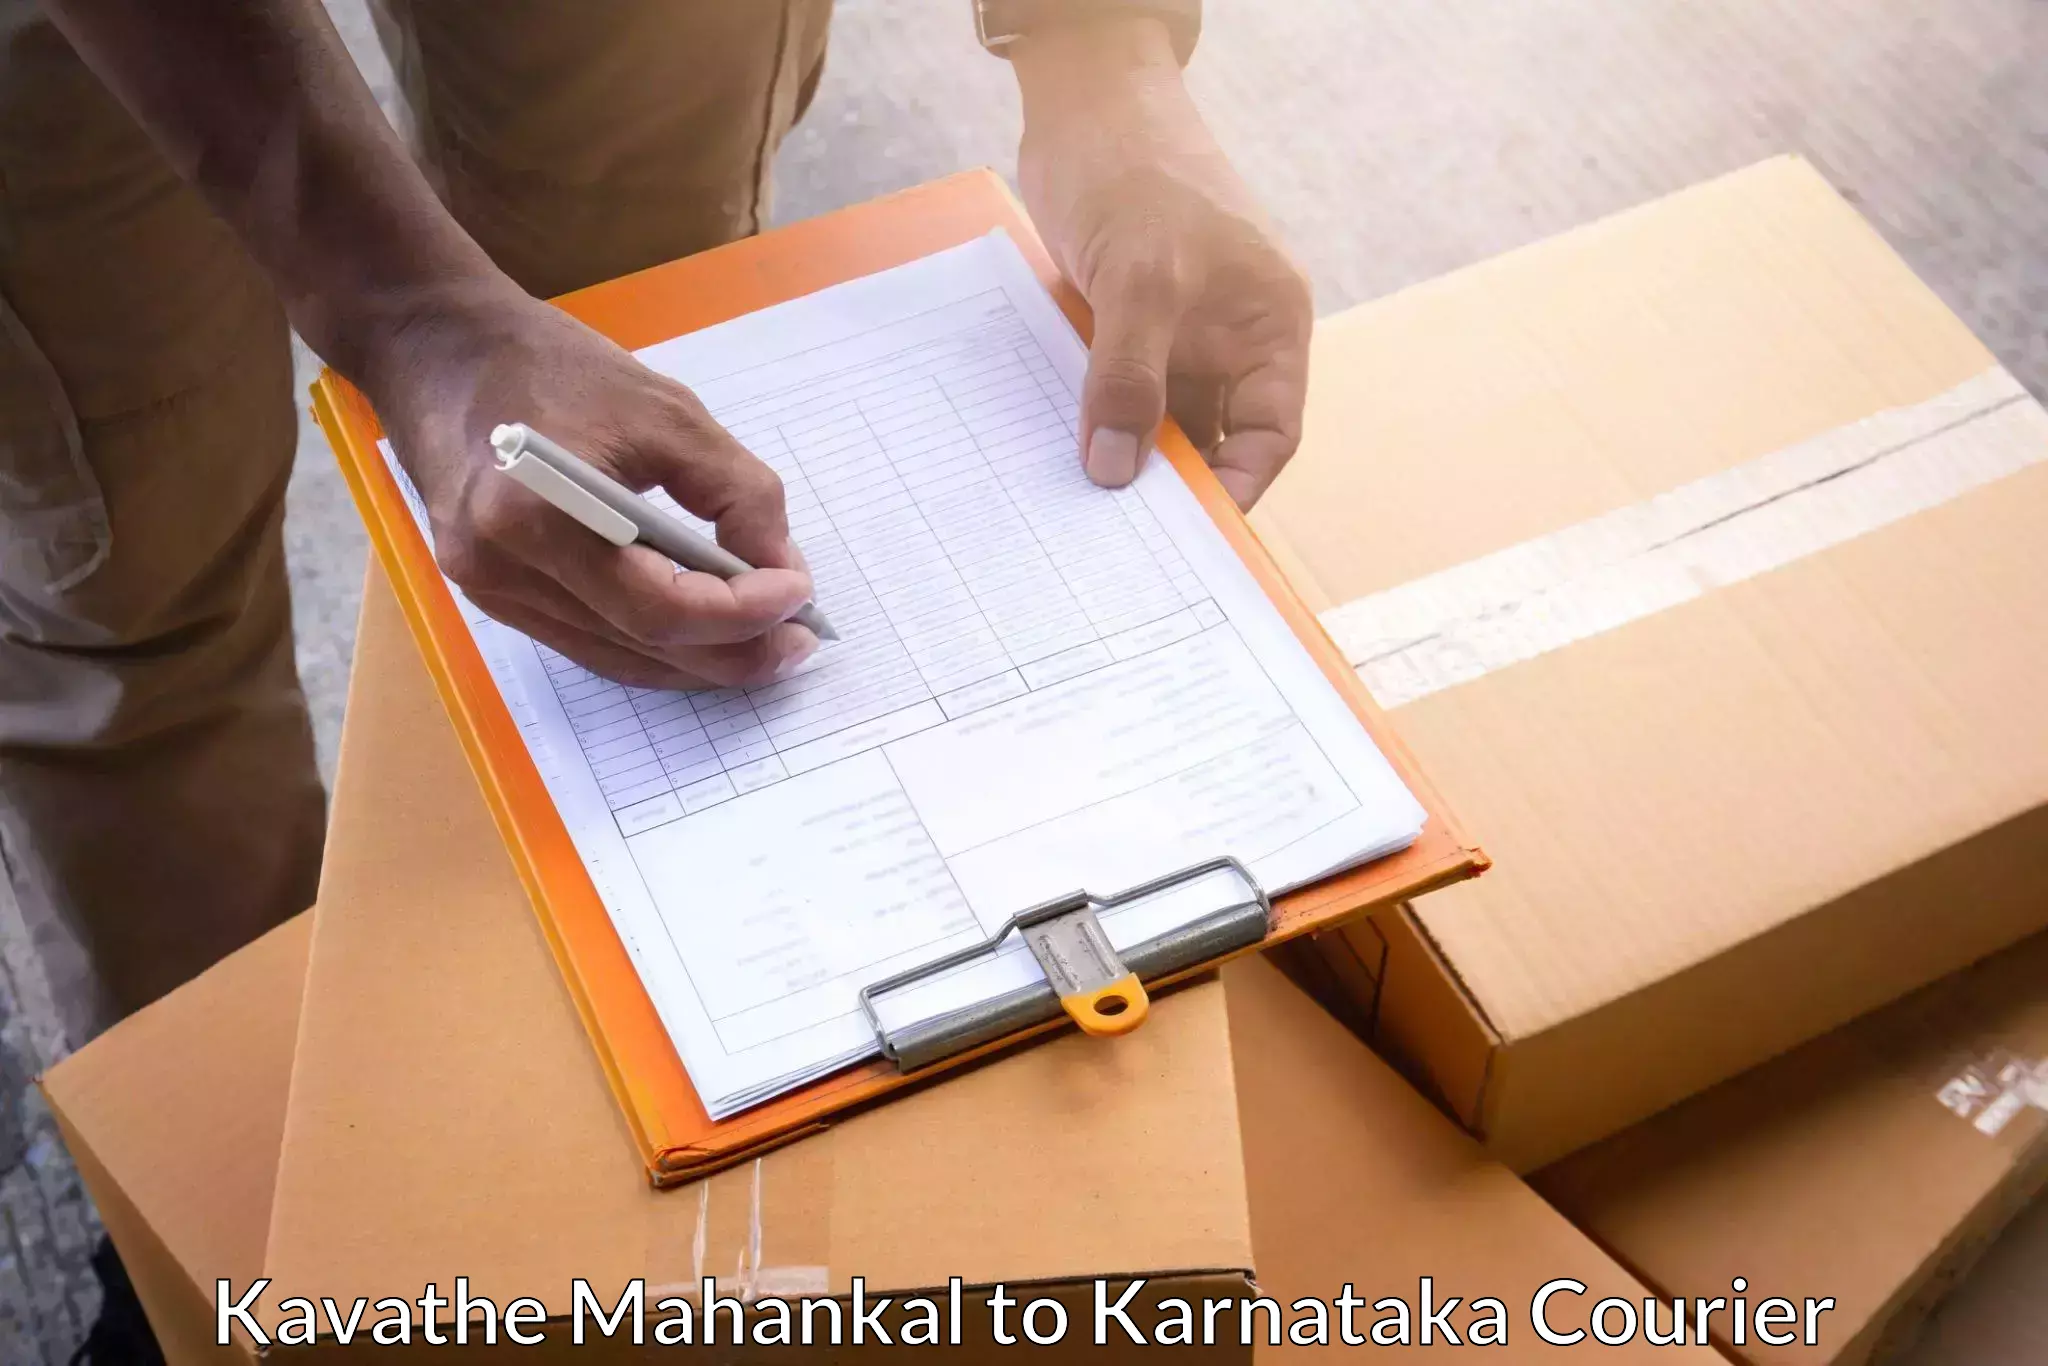 Heavy parcel delivery in Kavathe Mahankal to Hangal